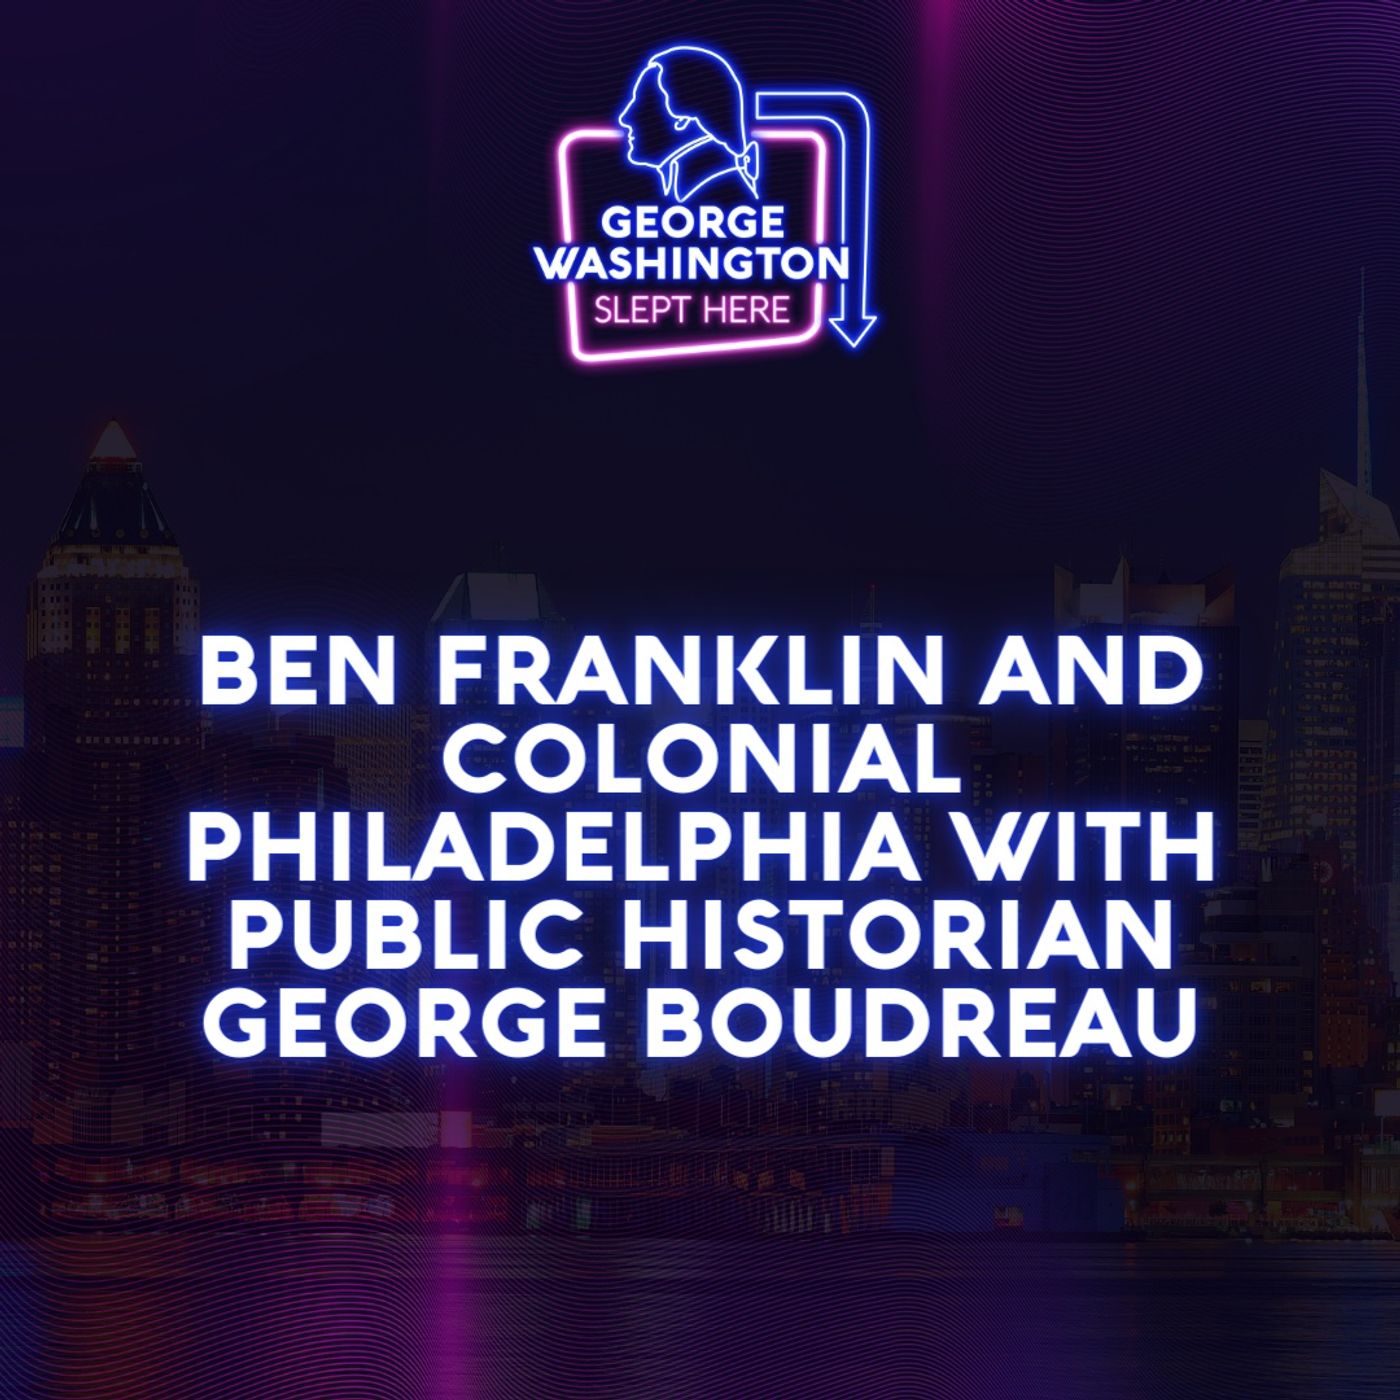 Ben Franklin and colonial Philadelphia with public historian George Boudreau